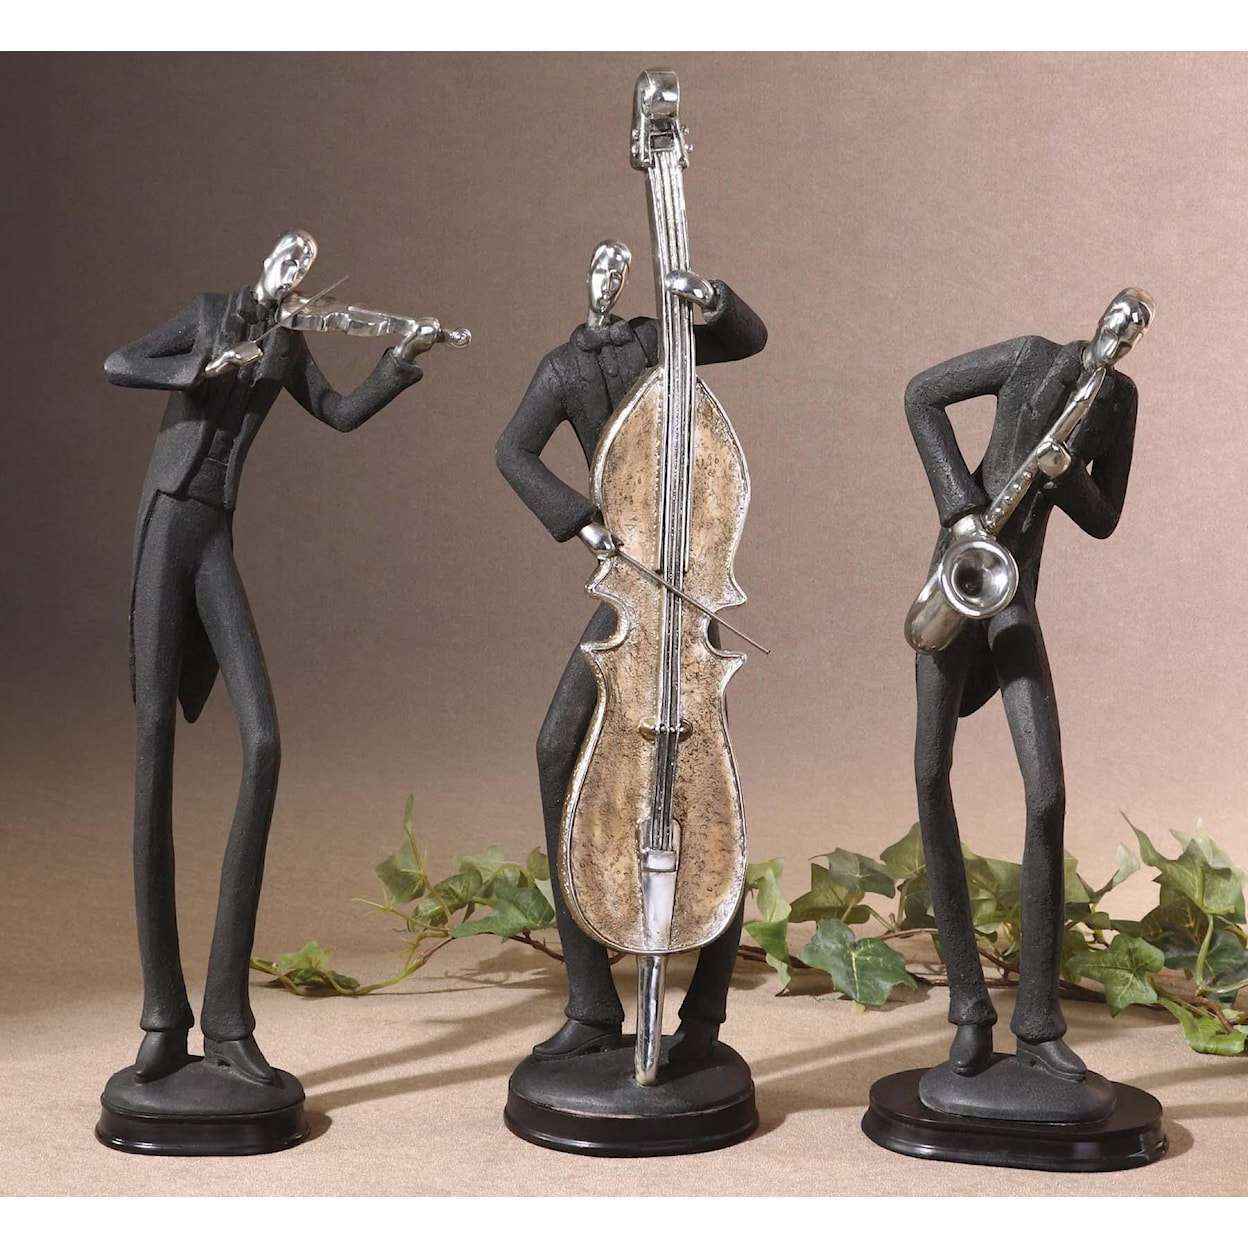 Uttermost Accessories - Statues and Figurines Musicians Accessories Set of 3